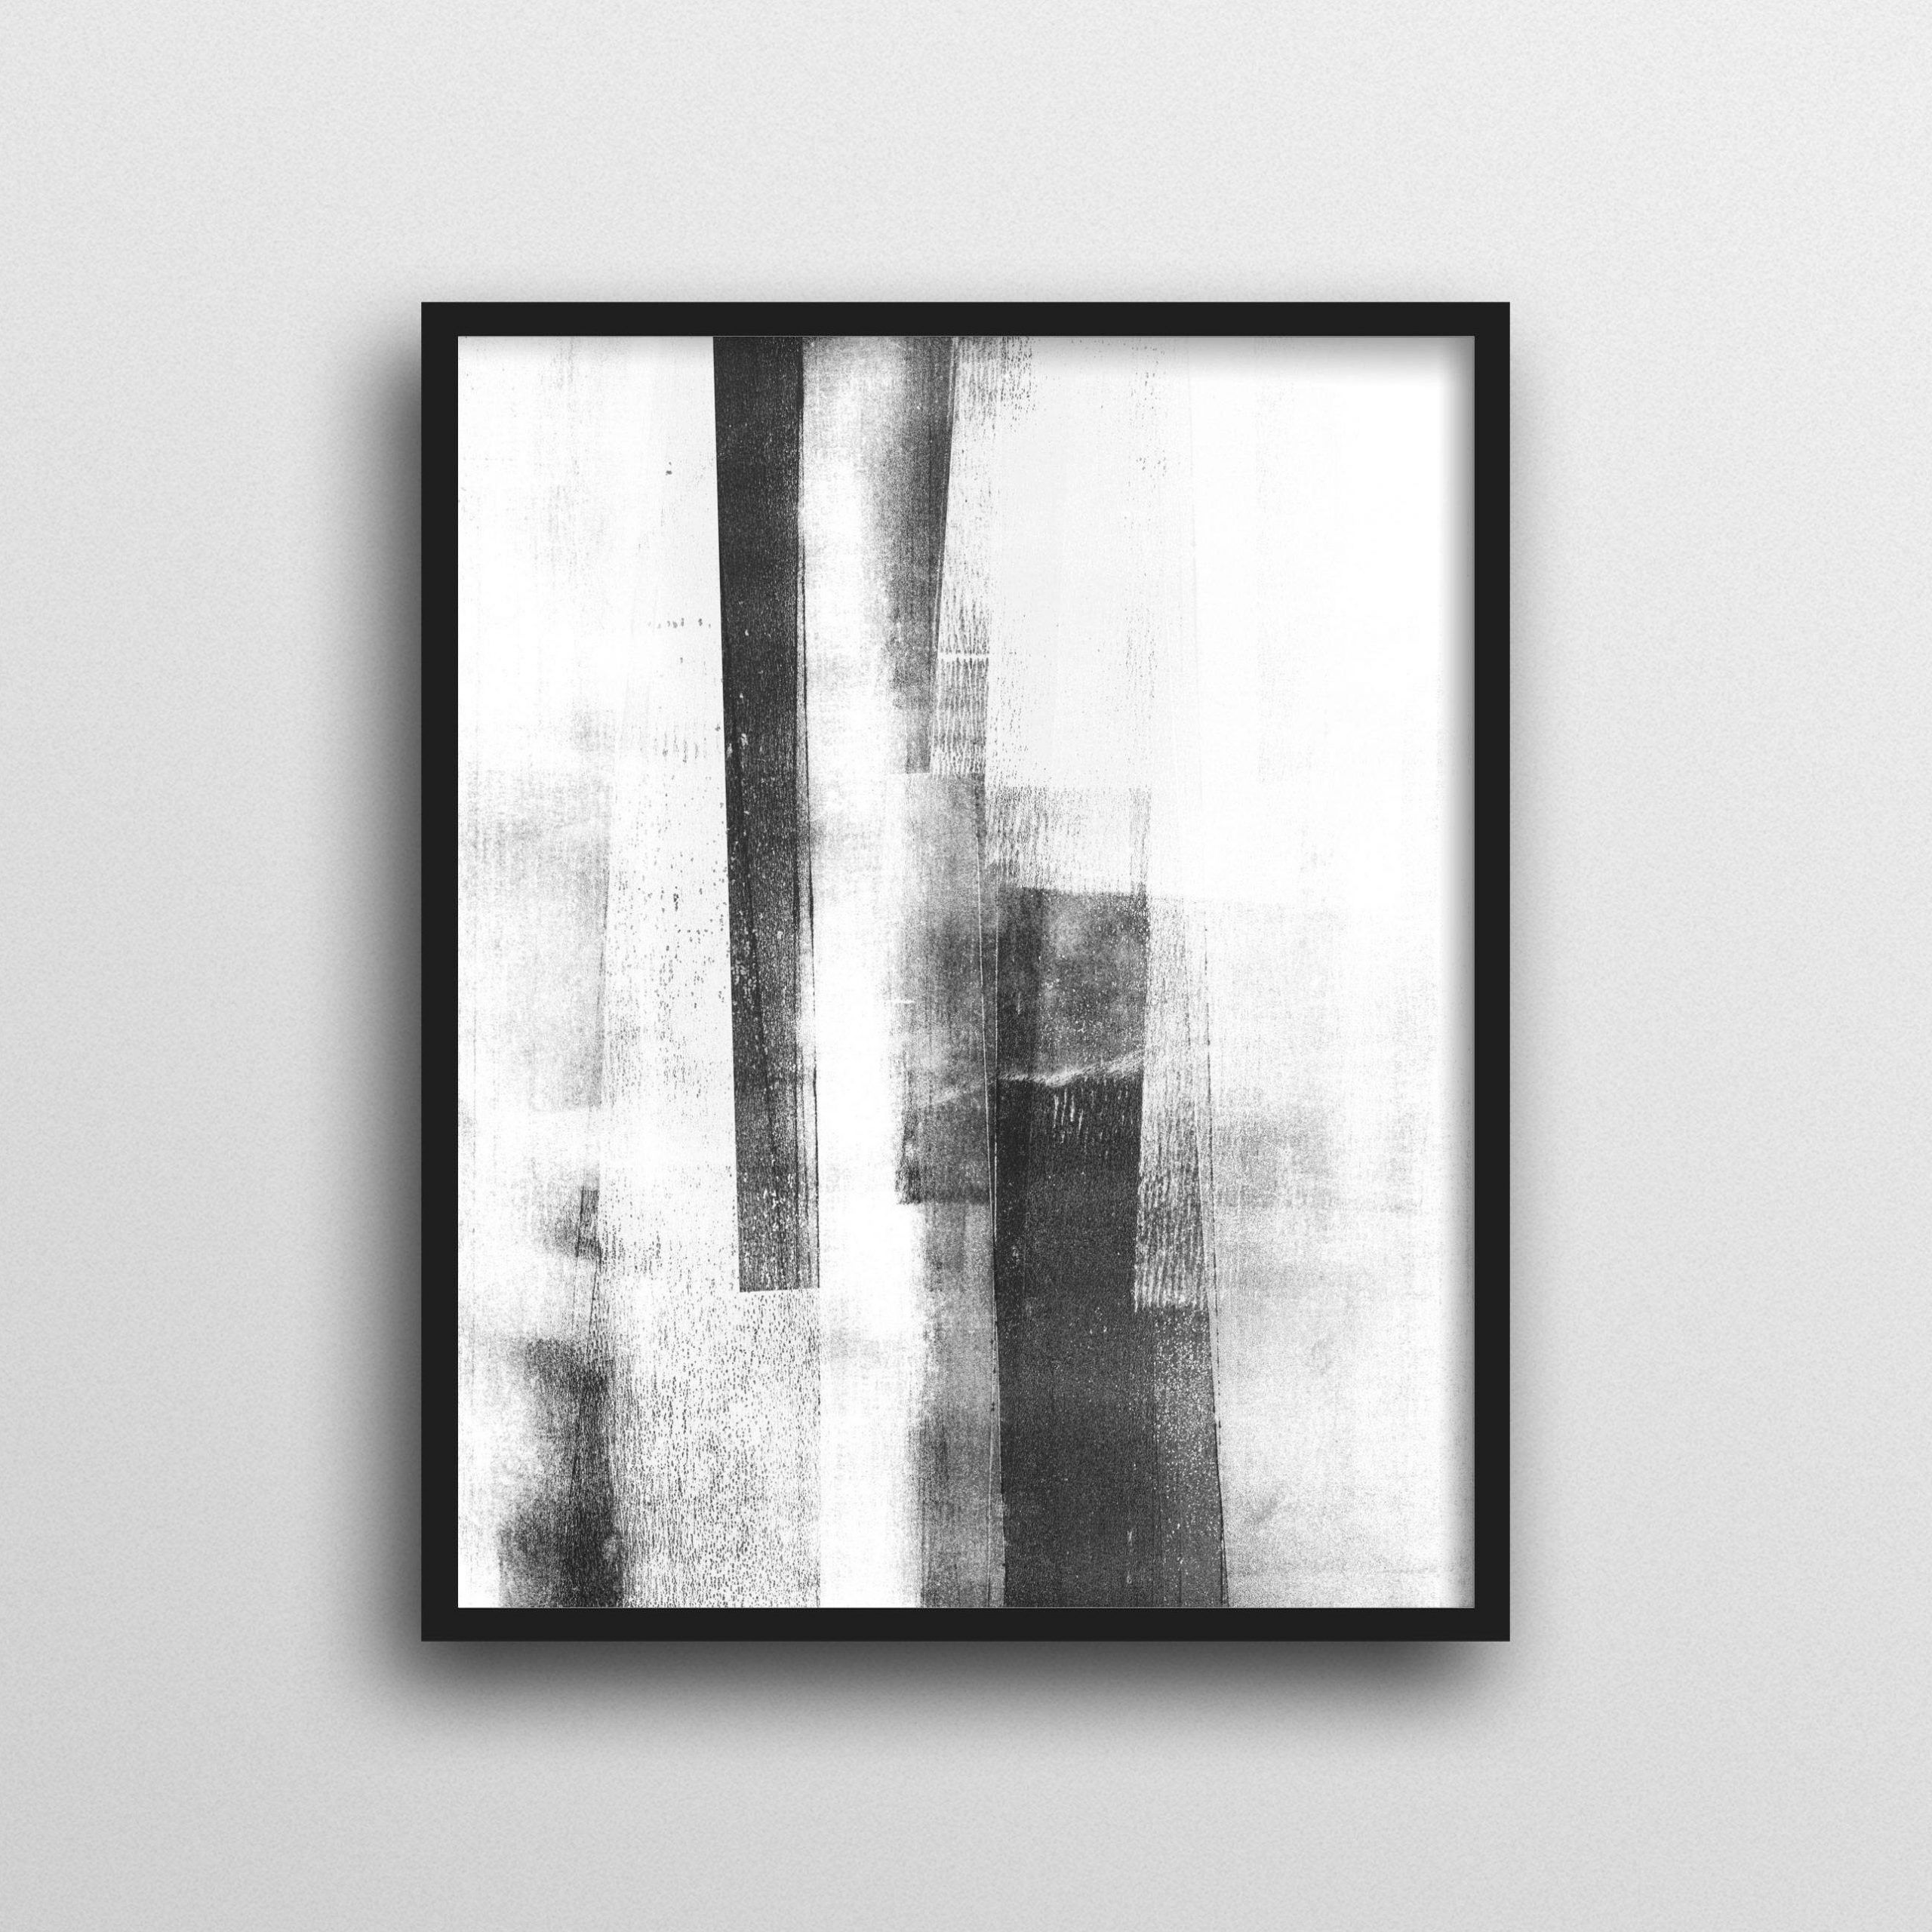 Monochrome Framed Art Prints Intended For Latest Pin On Art (View 10 of 20)